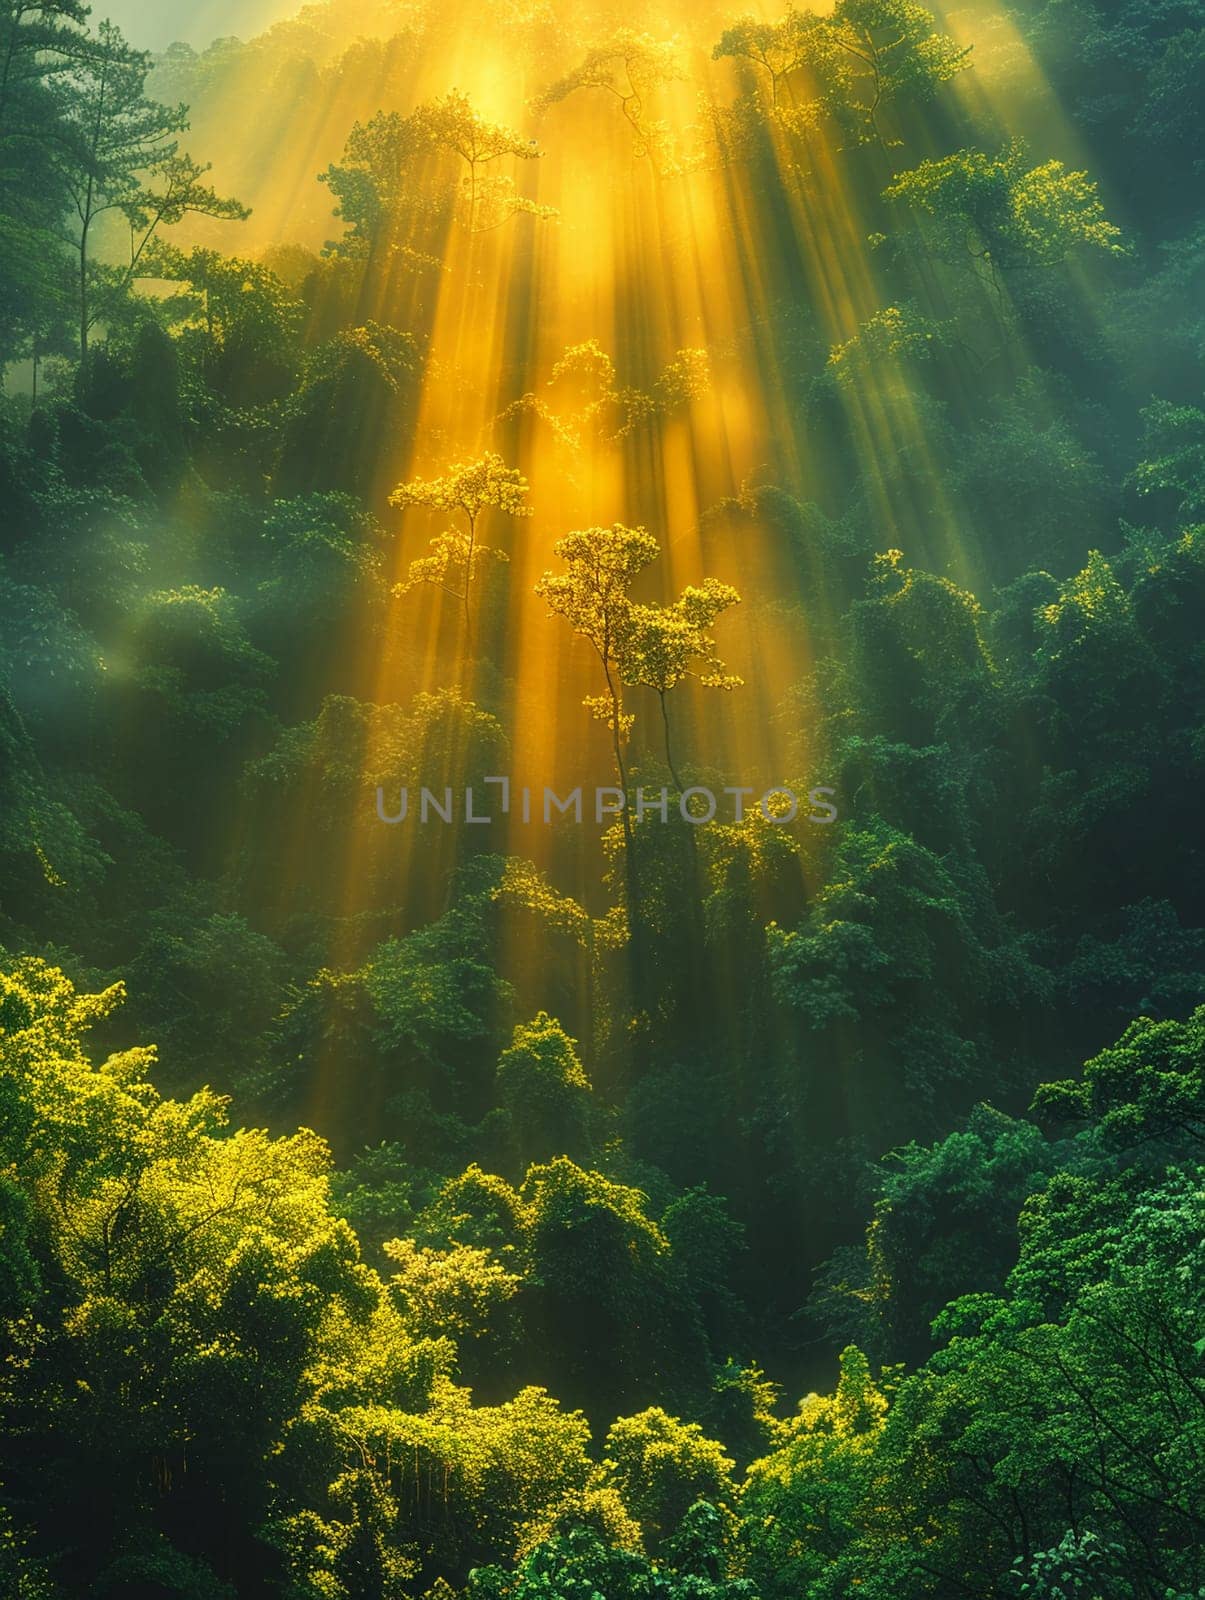 Sunlight filtering through dense forest trees, capturing a mystical and ethereal mood.